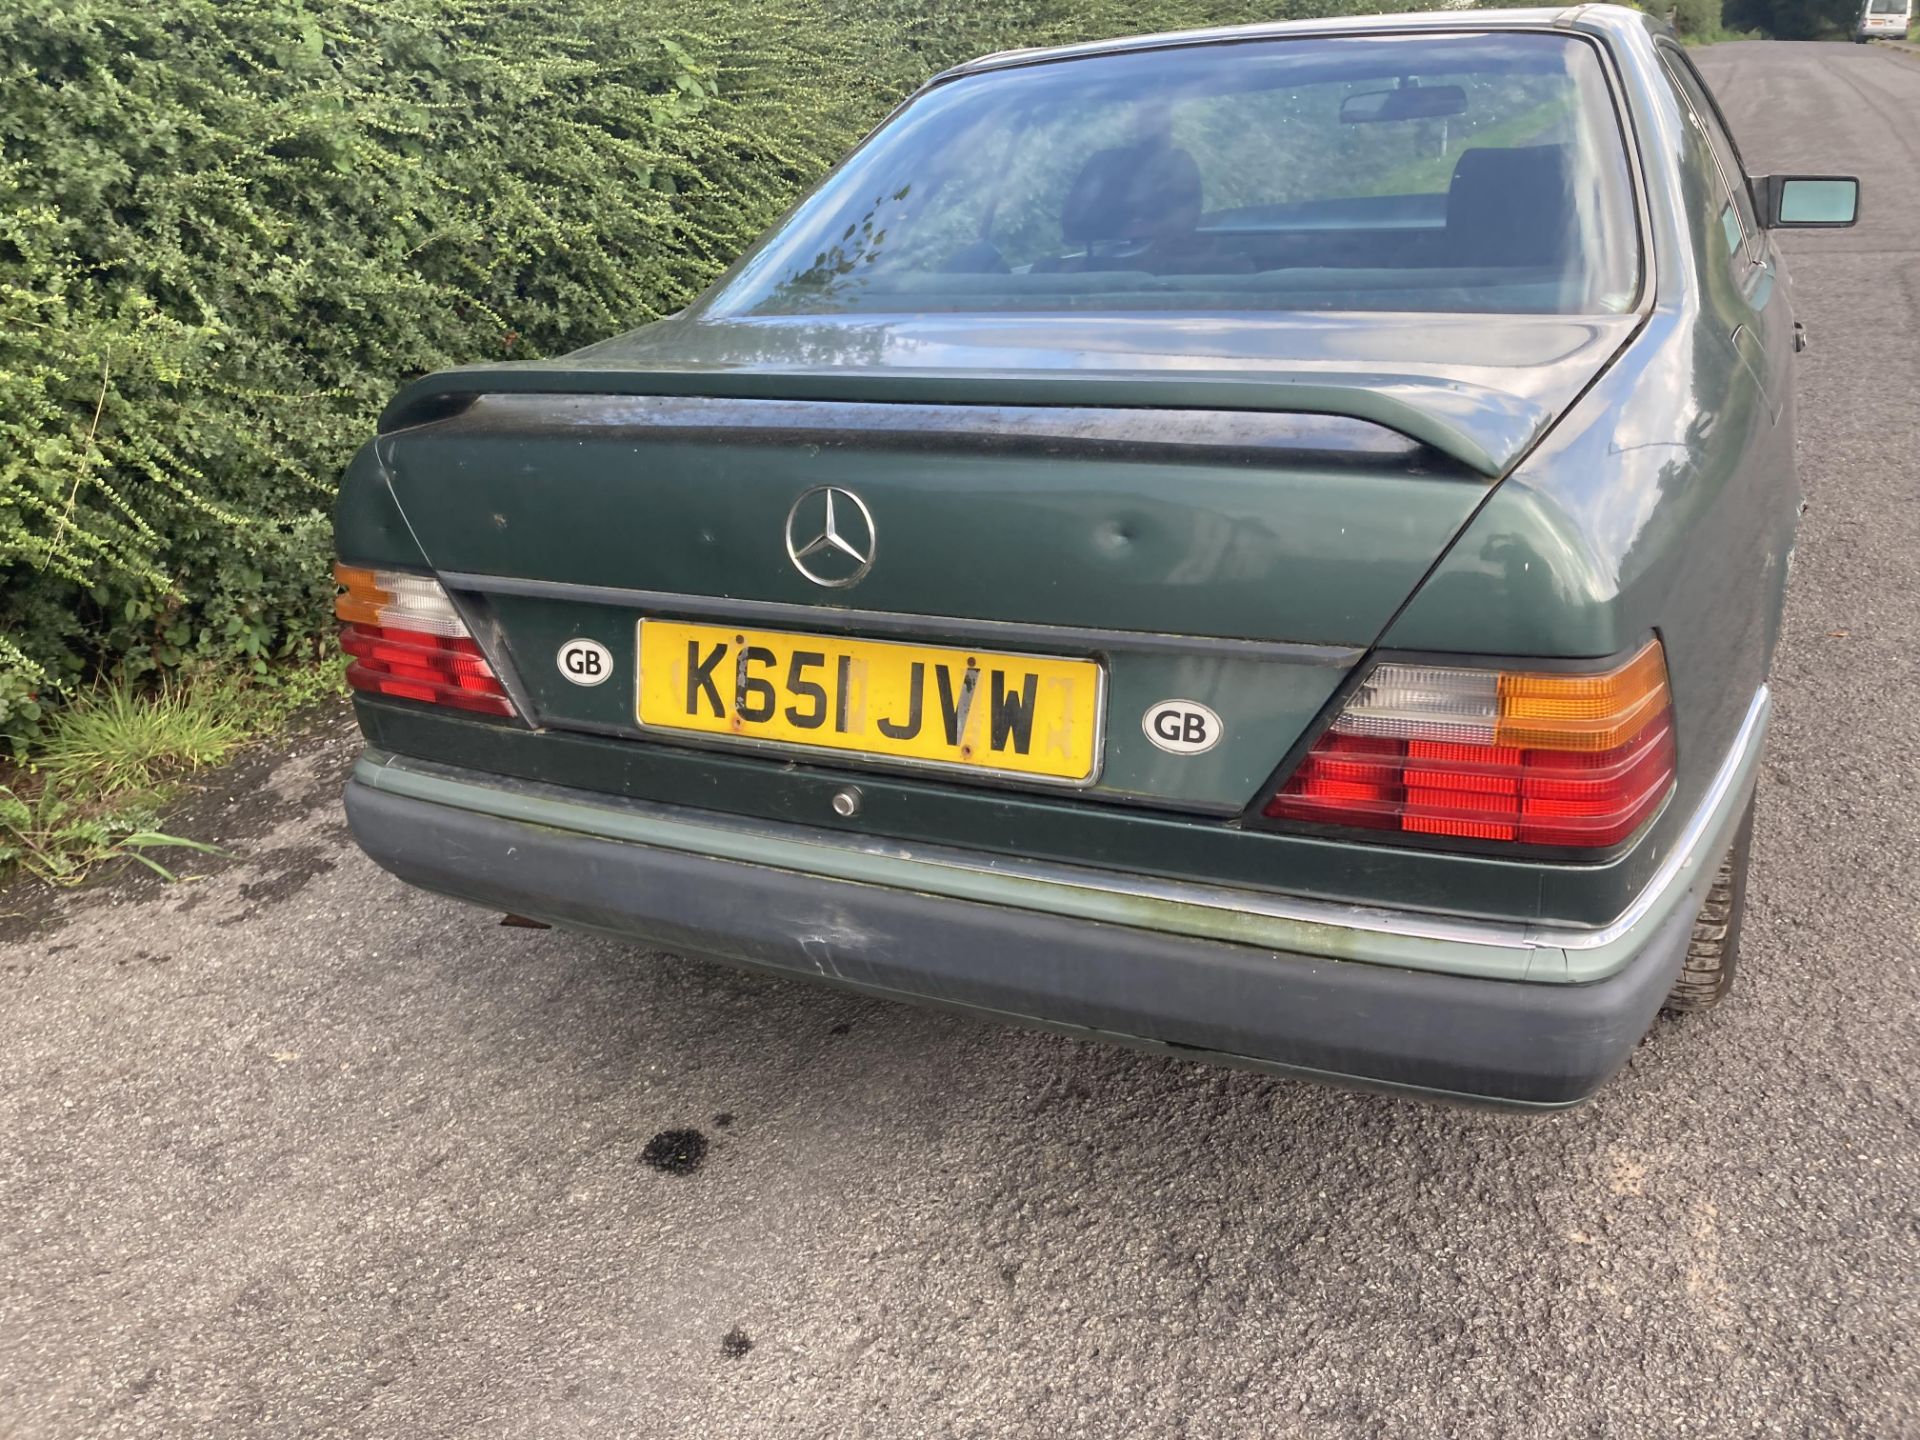 1992 MERCEDES 230E CLASSIC COUPE LOW RESERVE .LOCATION NORTHERN IRELAND. - Image 4 of 6